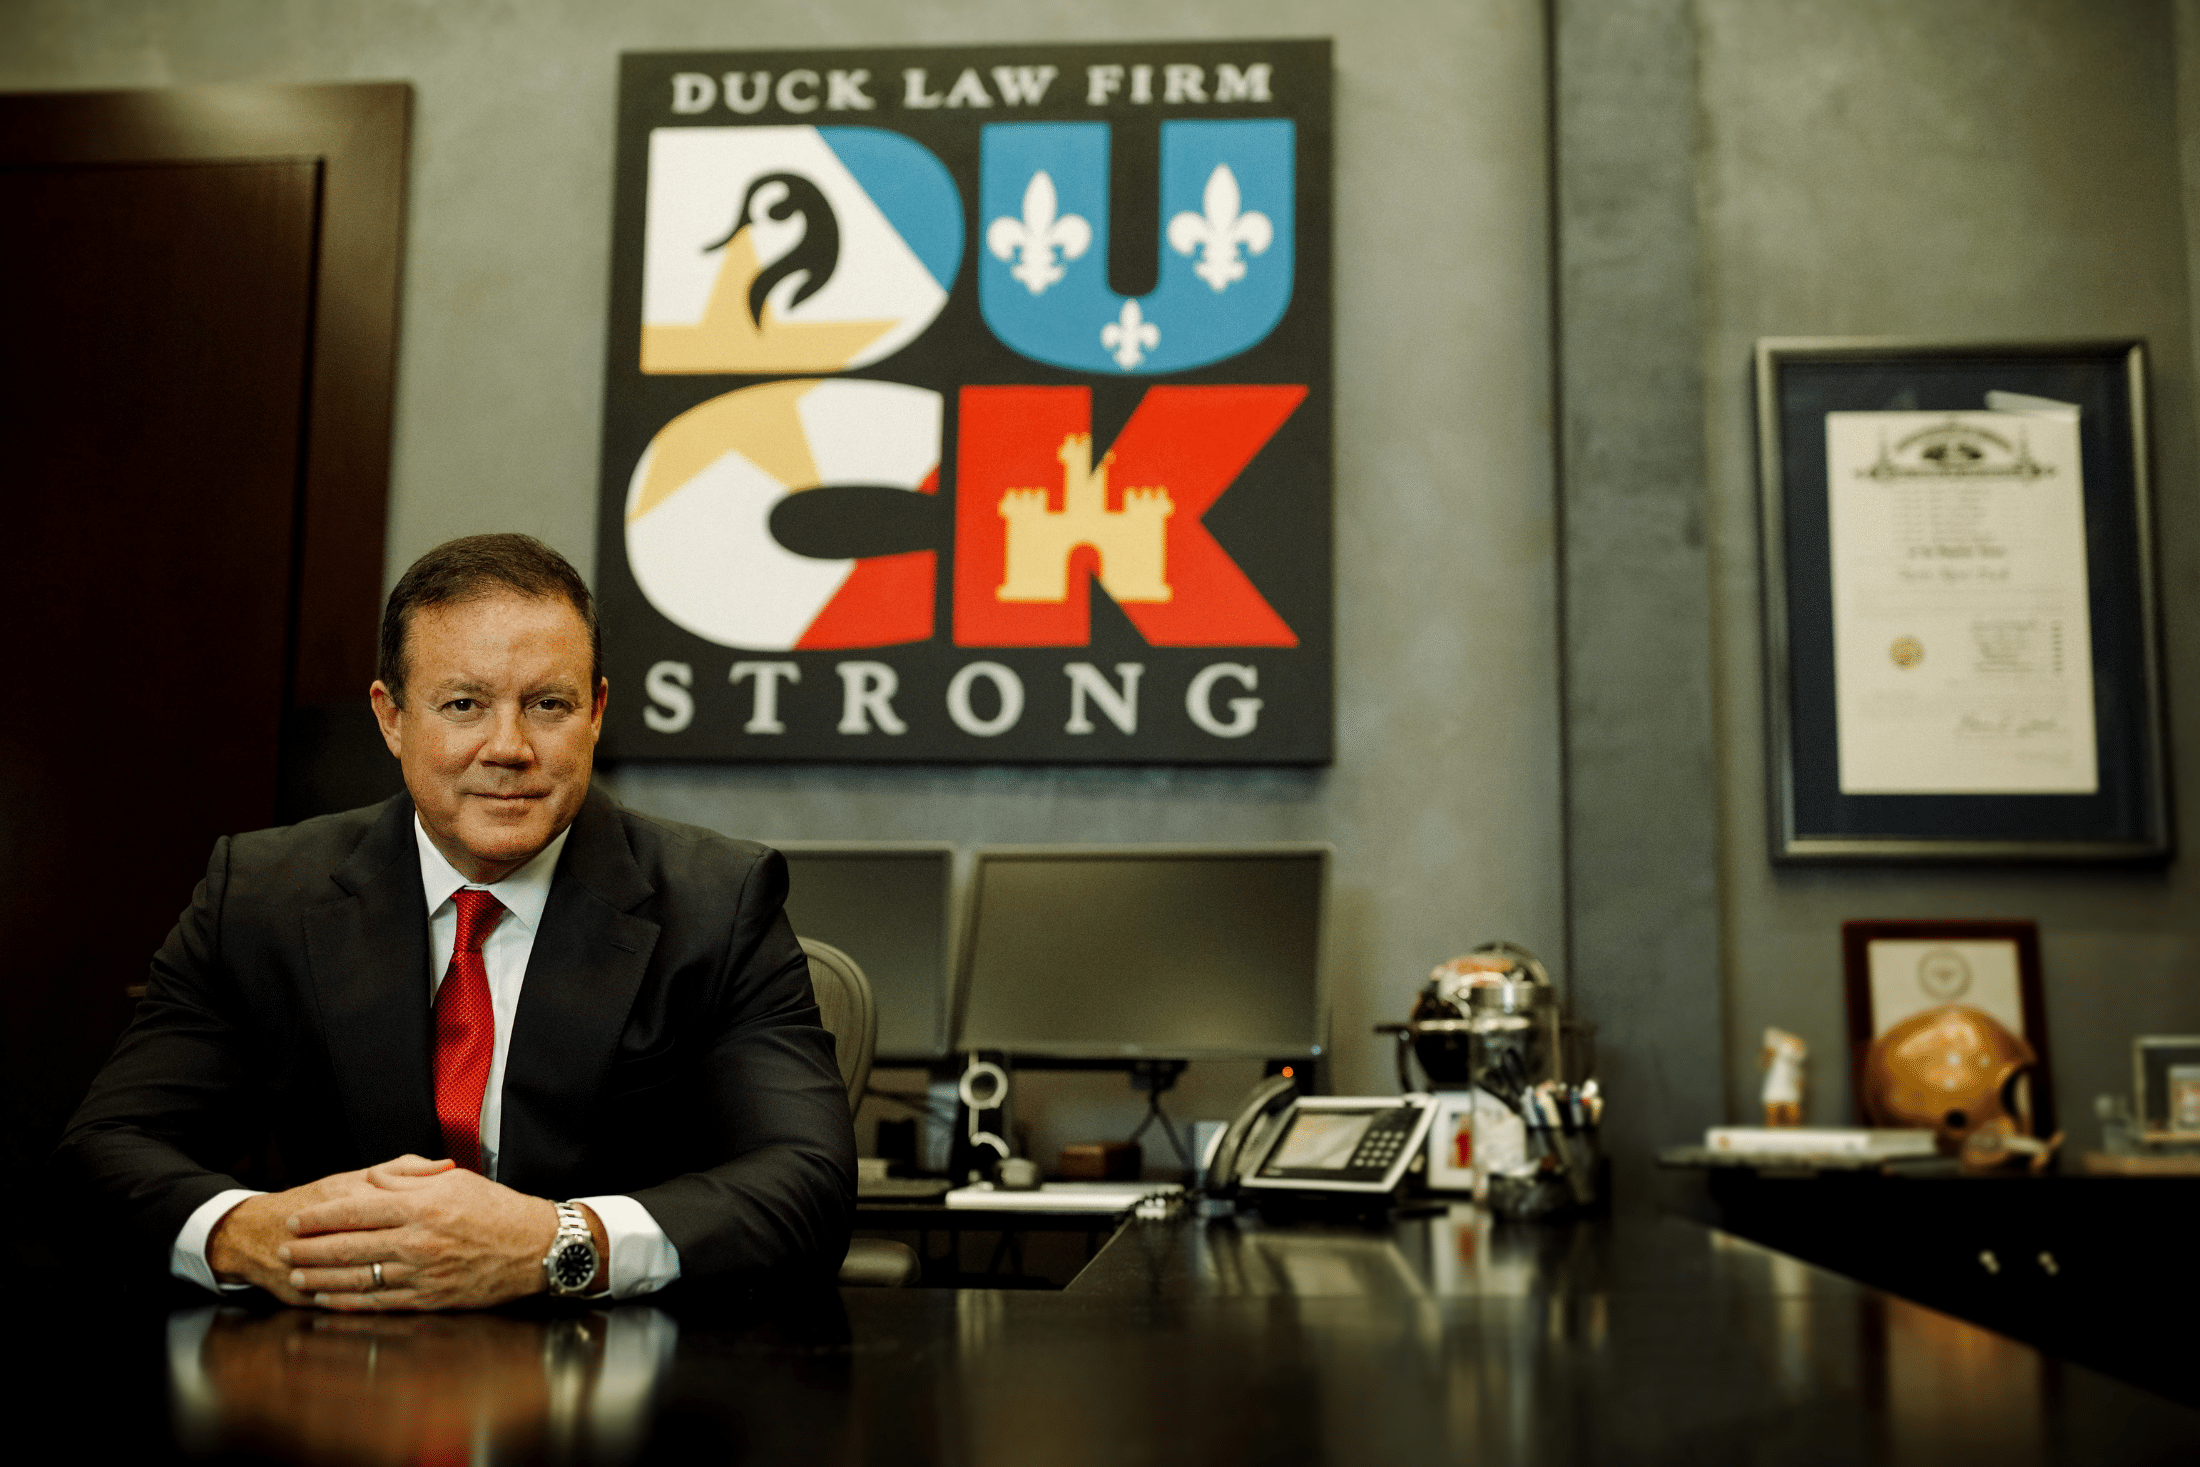 duck law firm